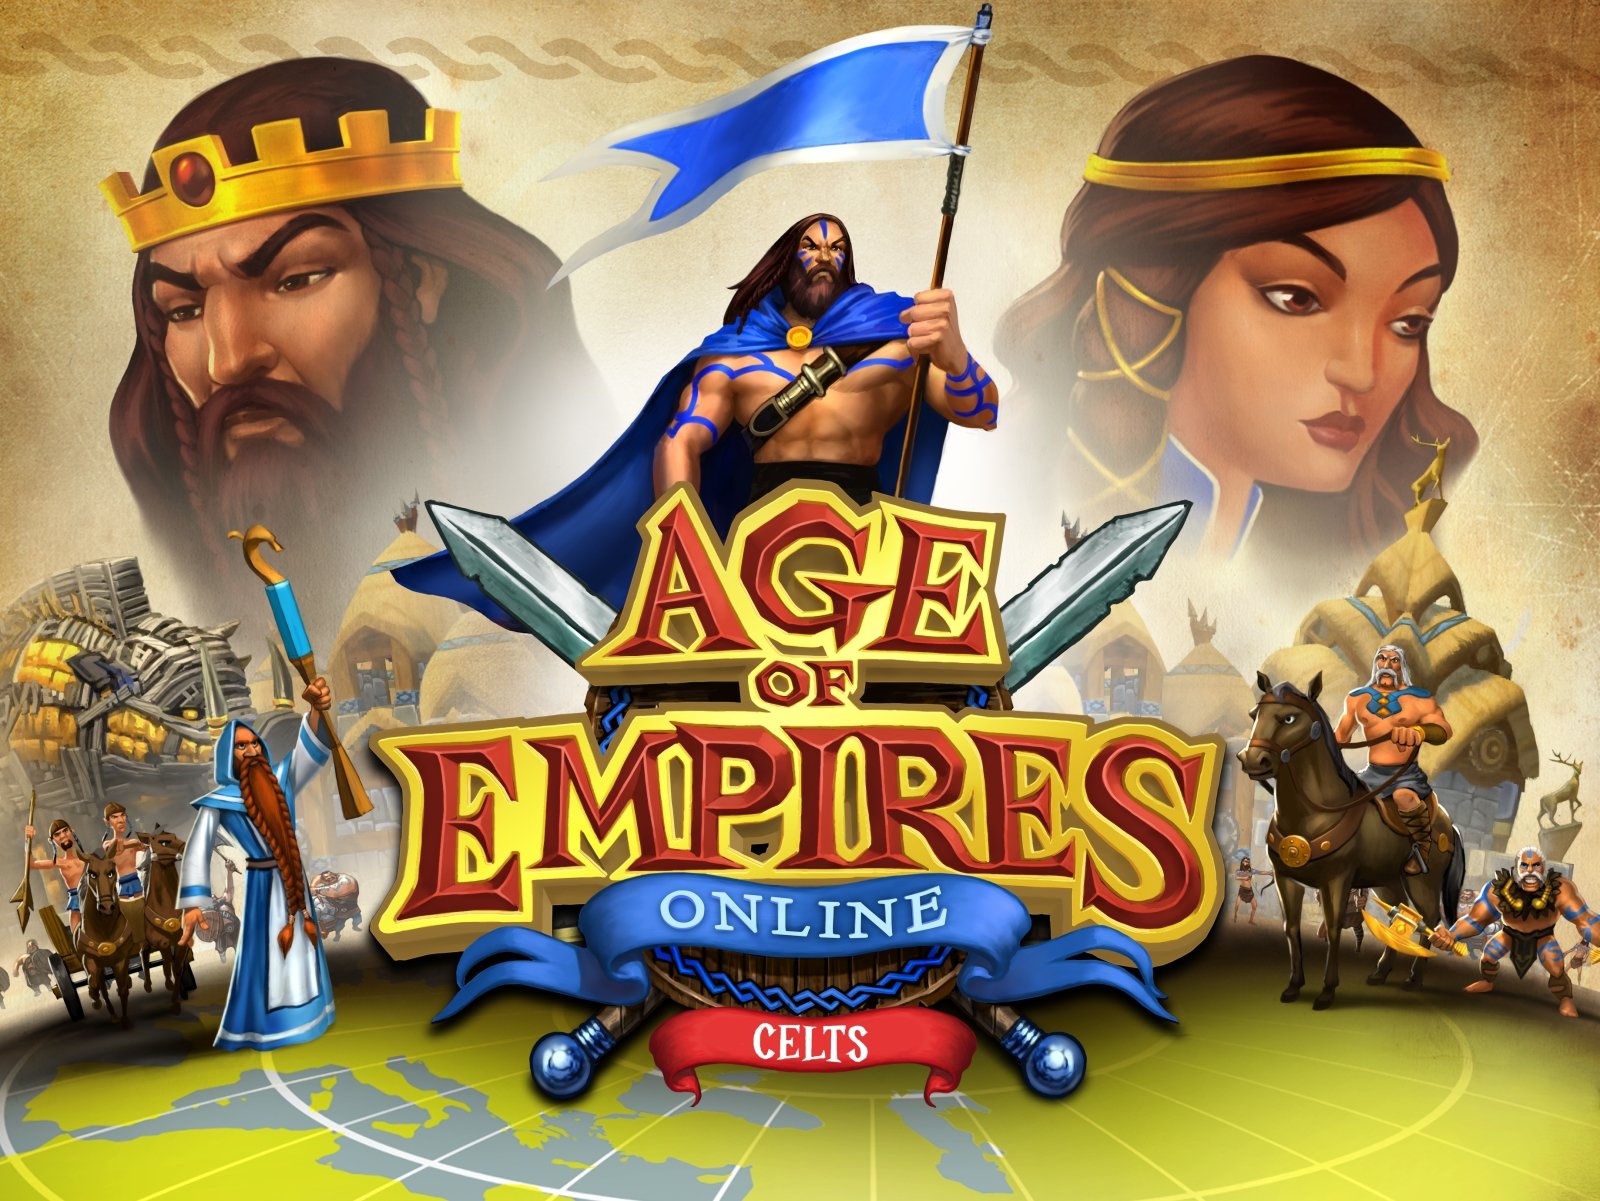 download age of empires hd steam